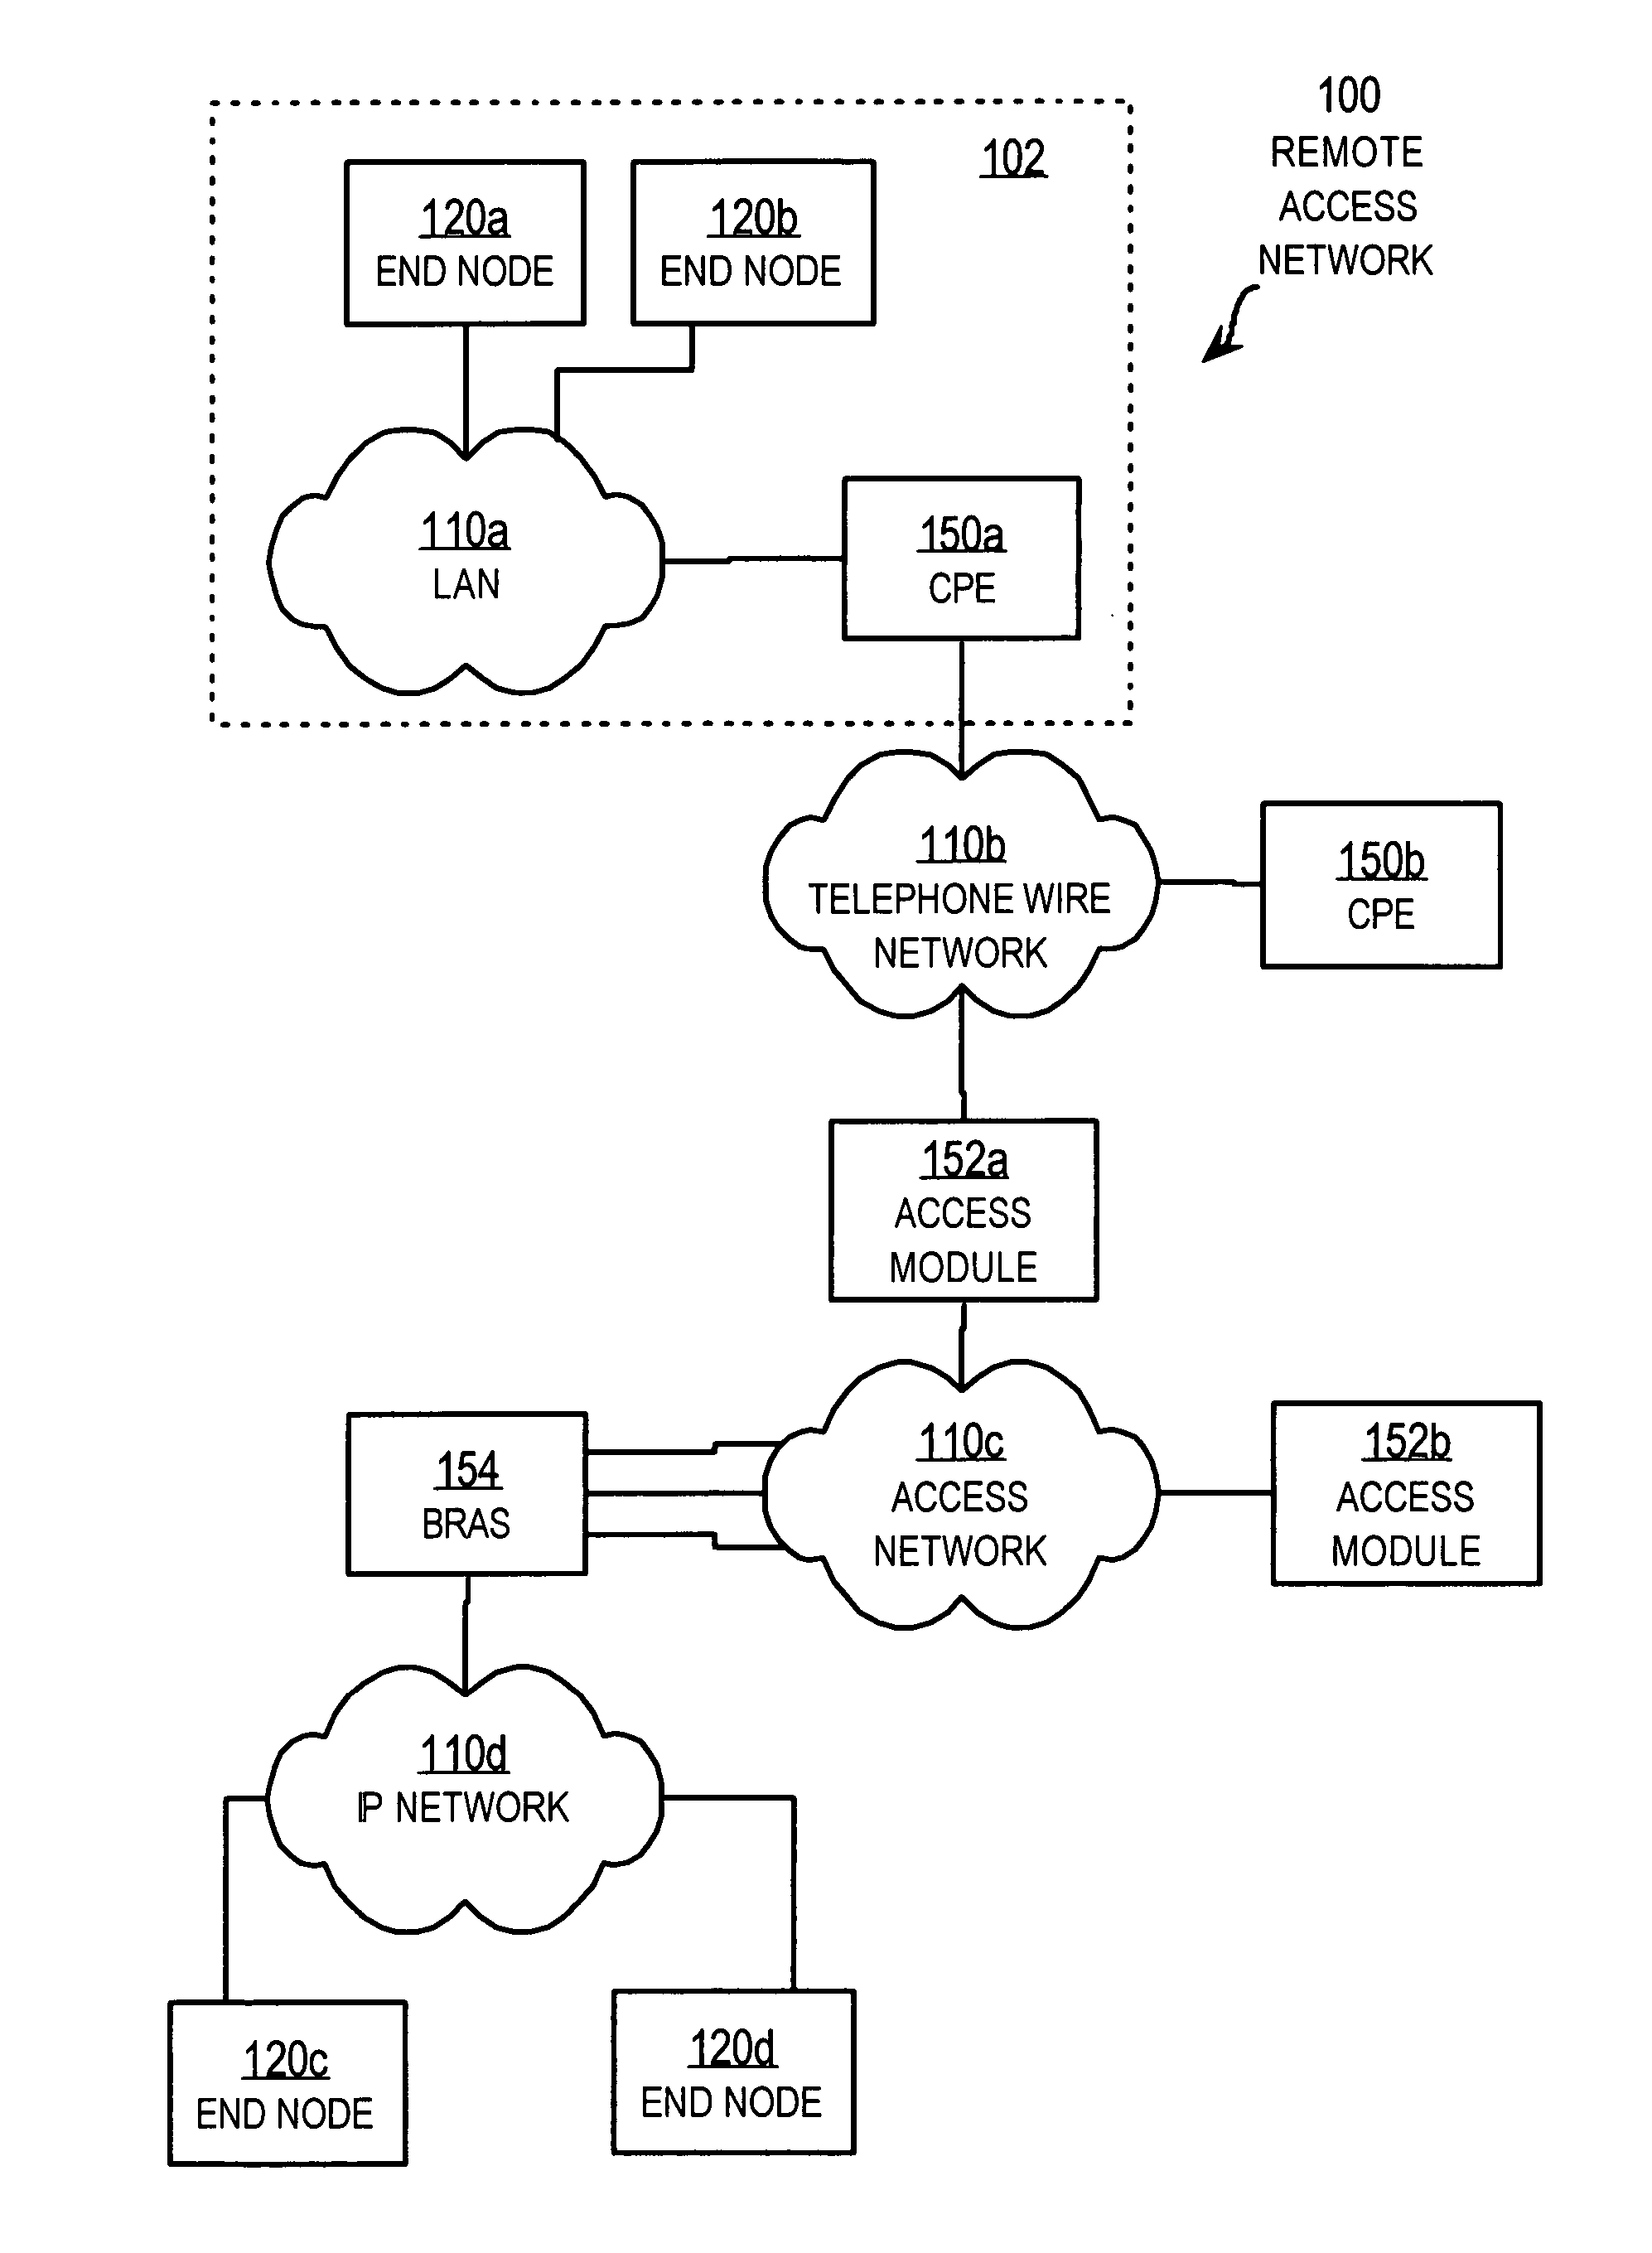 Techniques for migrating a point to point protocol to a protocol for an access network